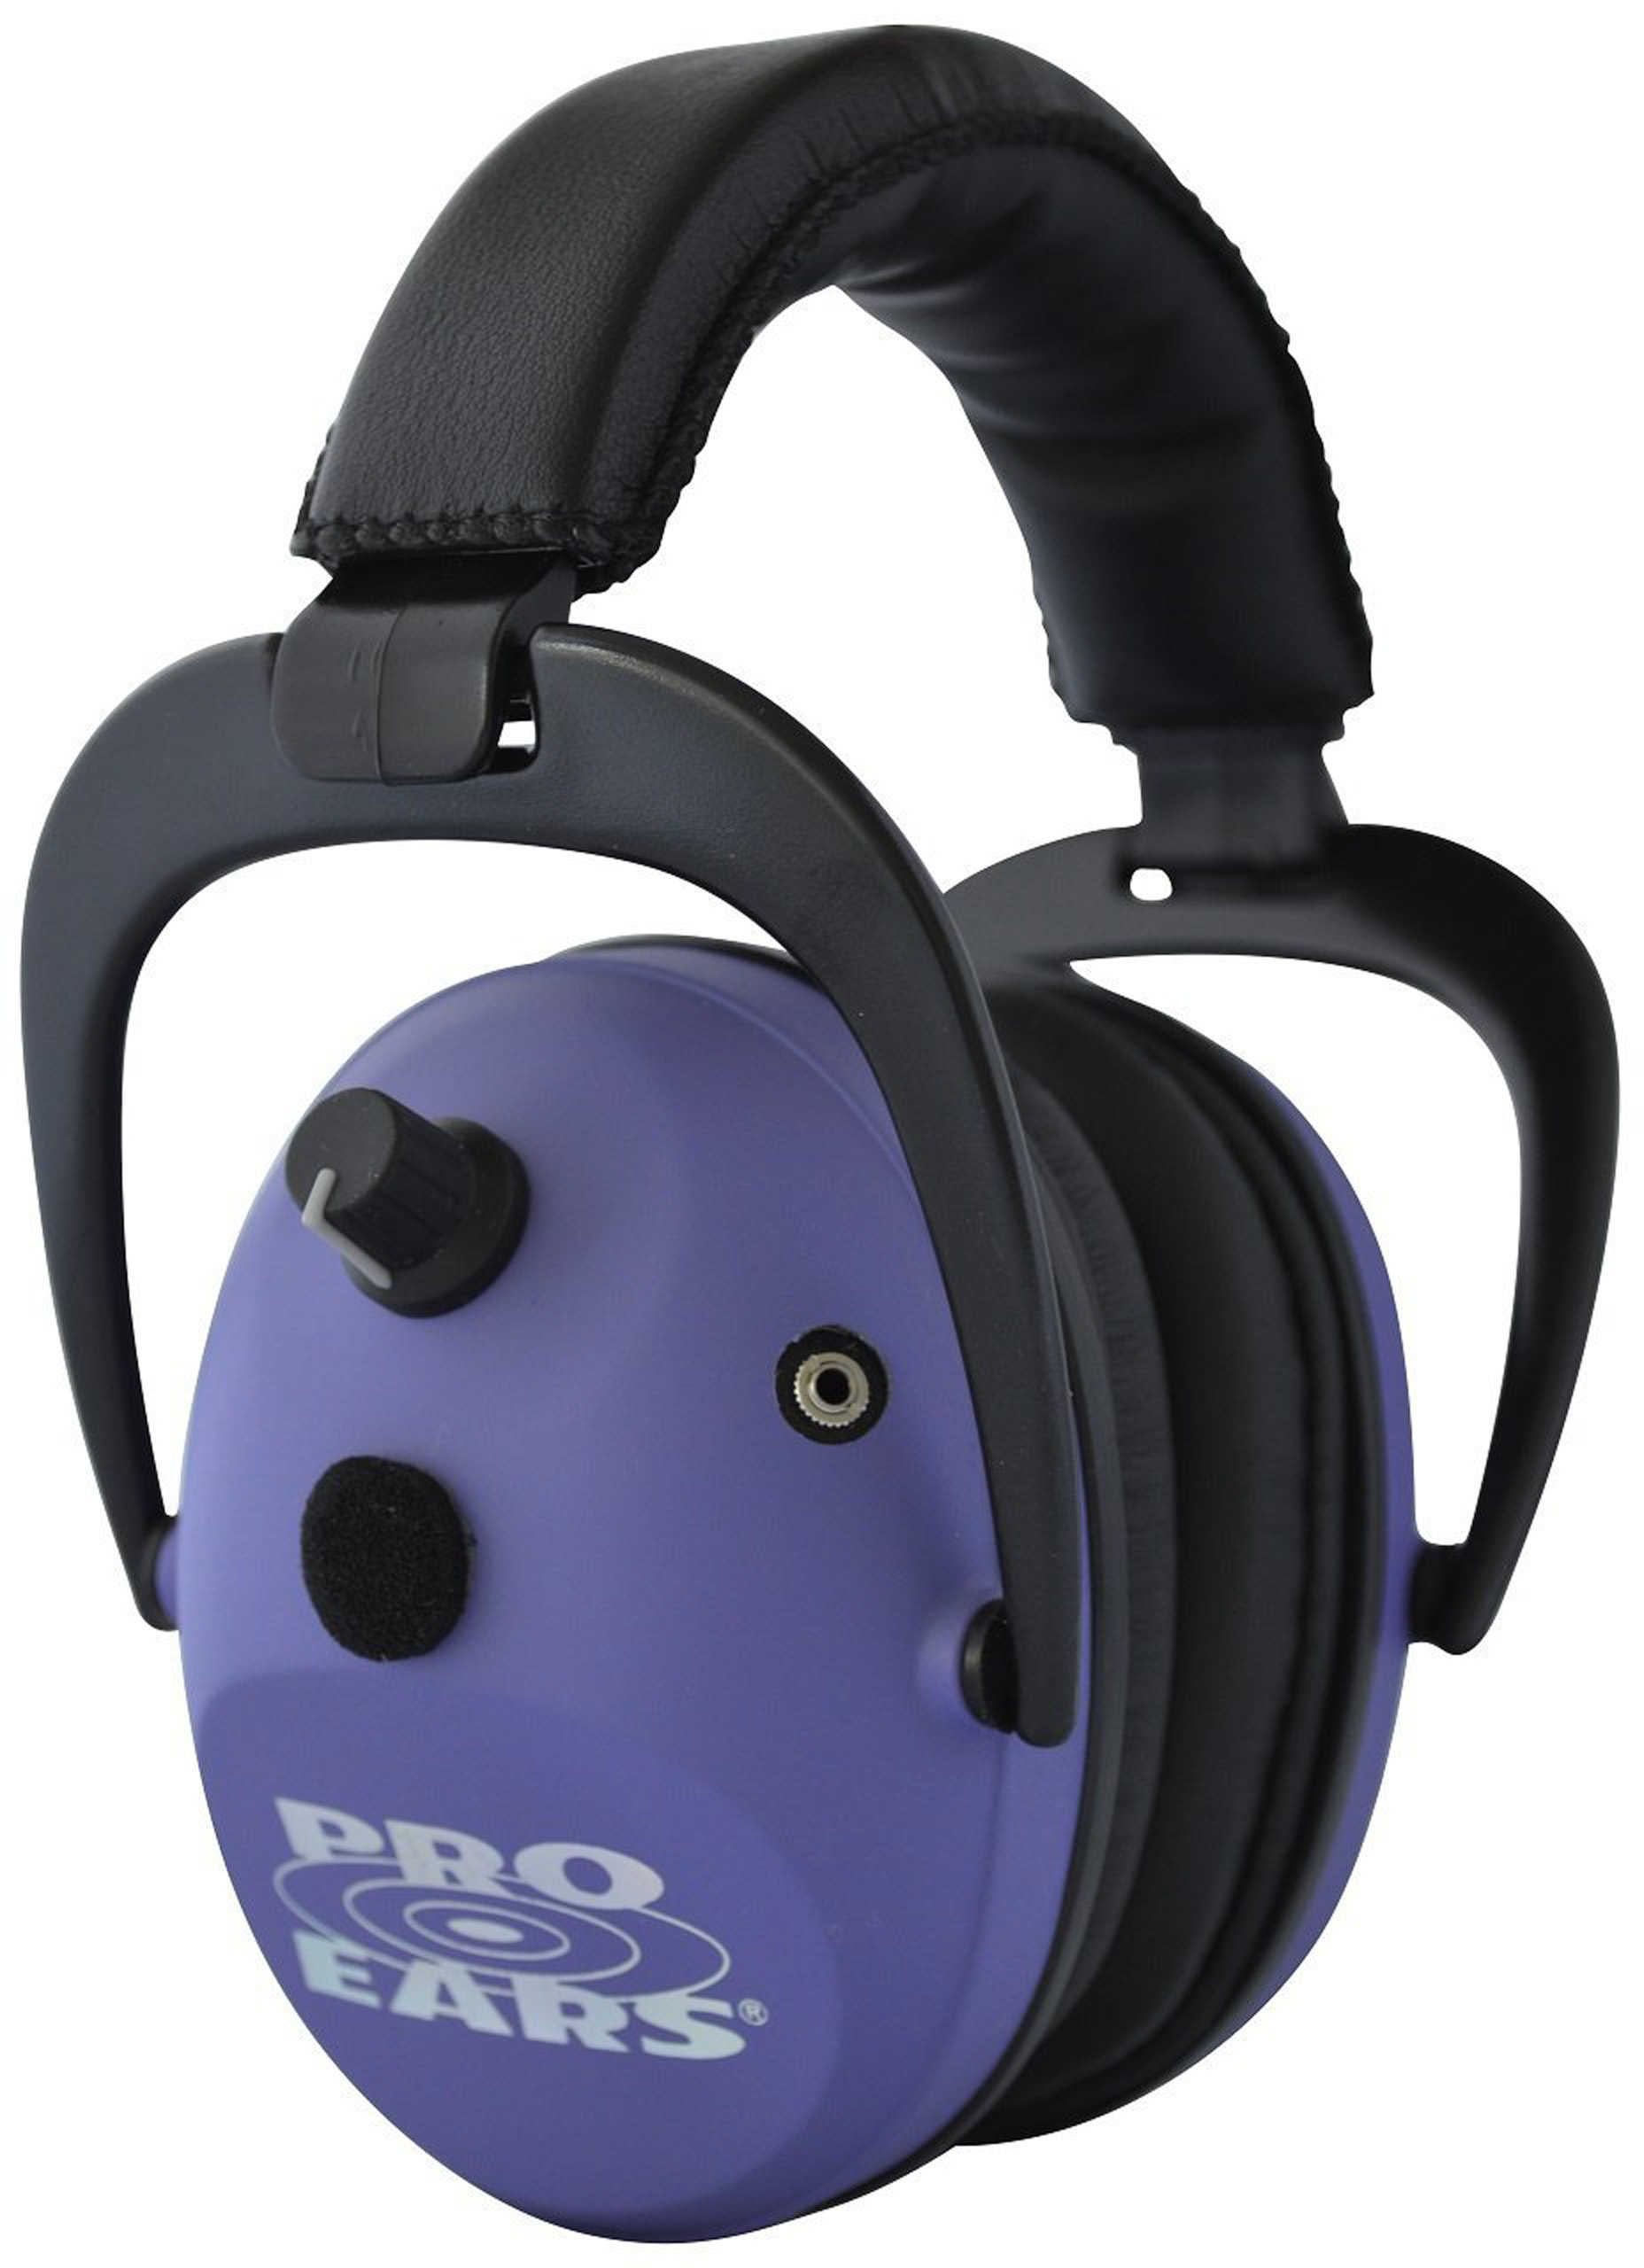 Pro Ears Predator Gold Noise Reduction Rating 26dB, Purple Md: GSP300PU